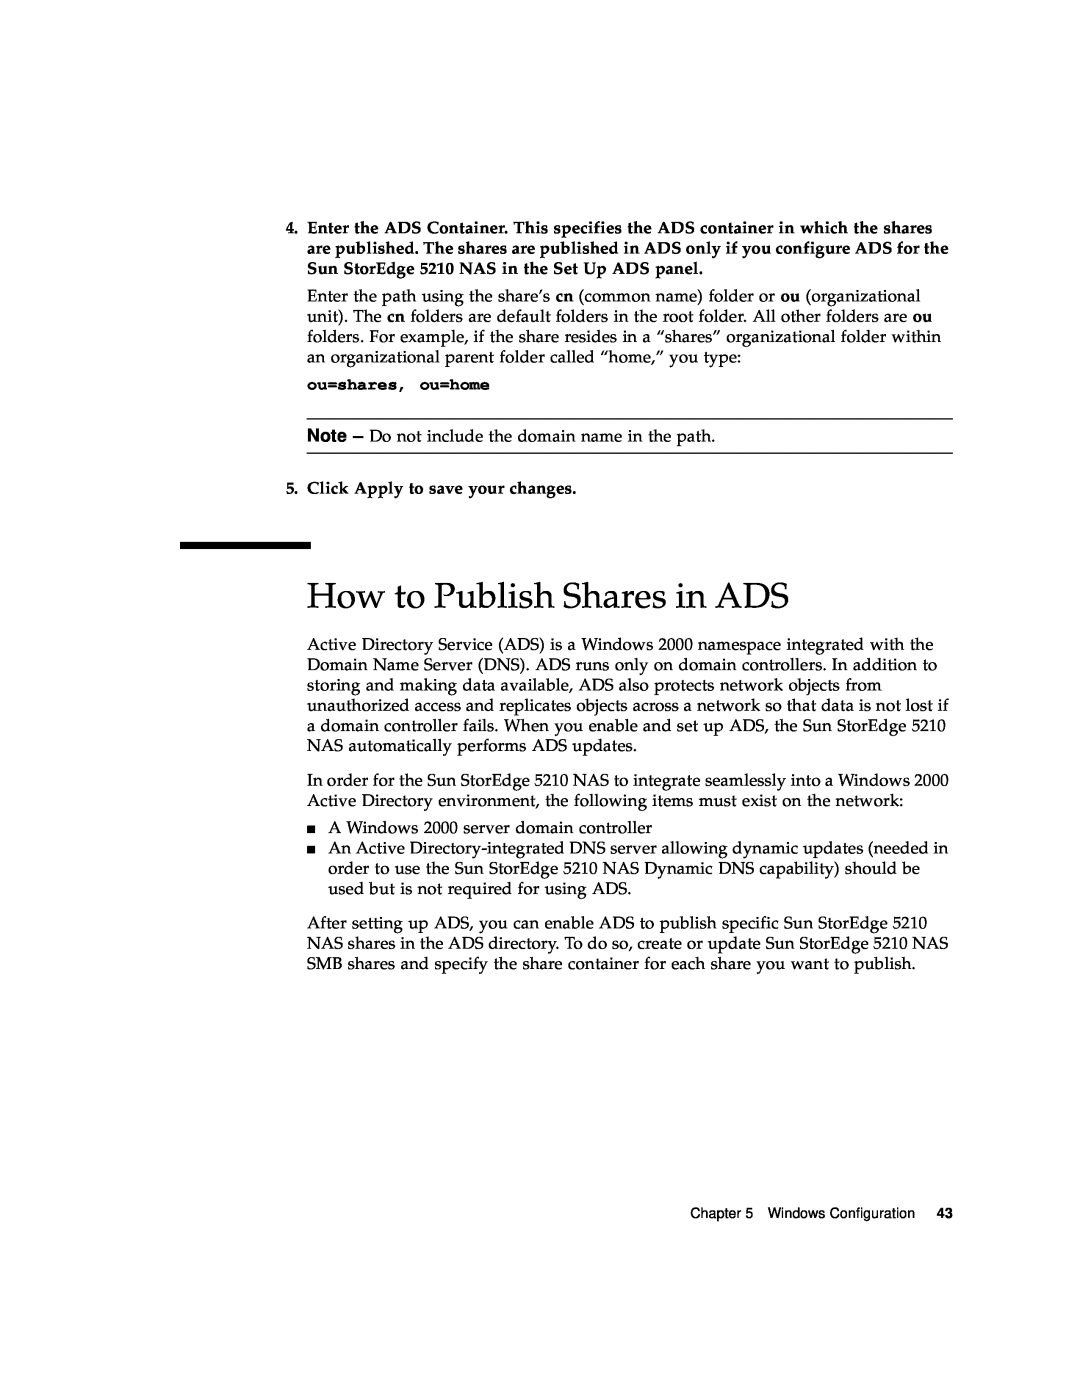 Sun Microsystems 5210 NAS manual How to Publish Shares in ADS, ou=shares, ou=home 